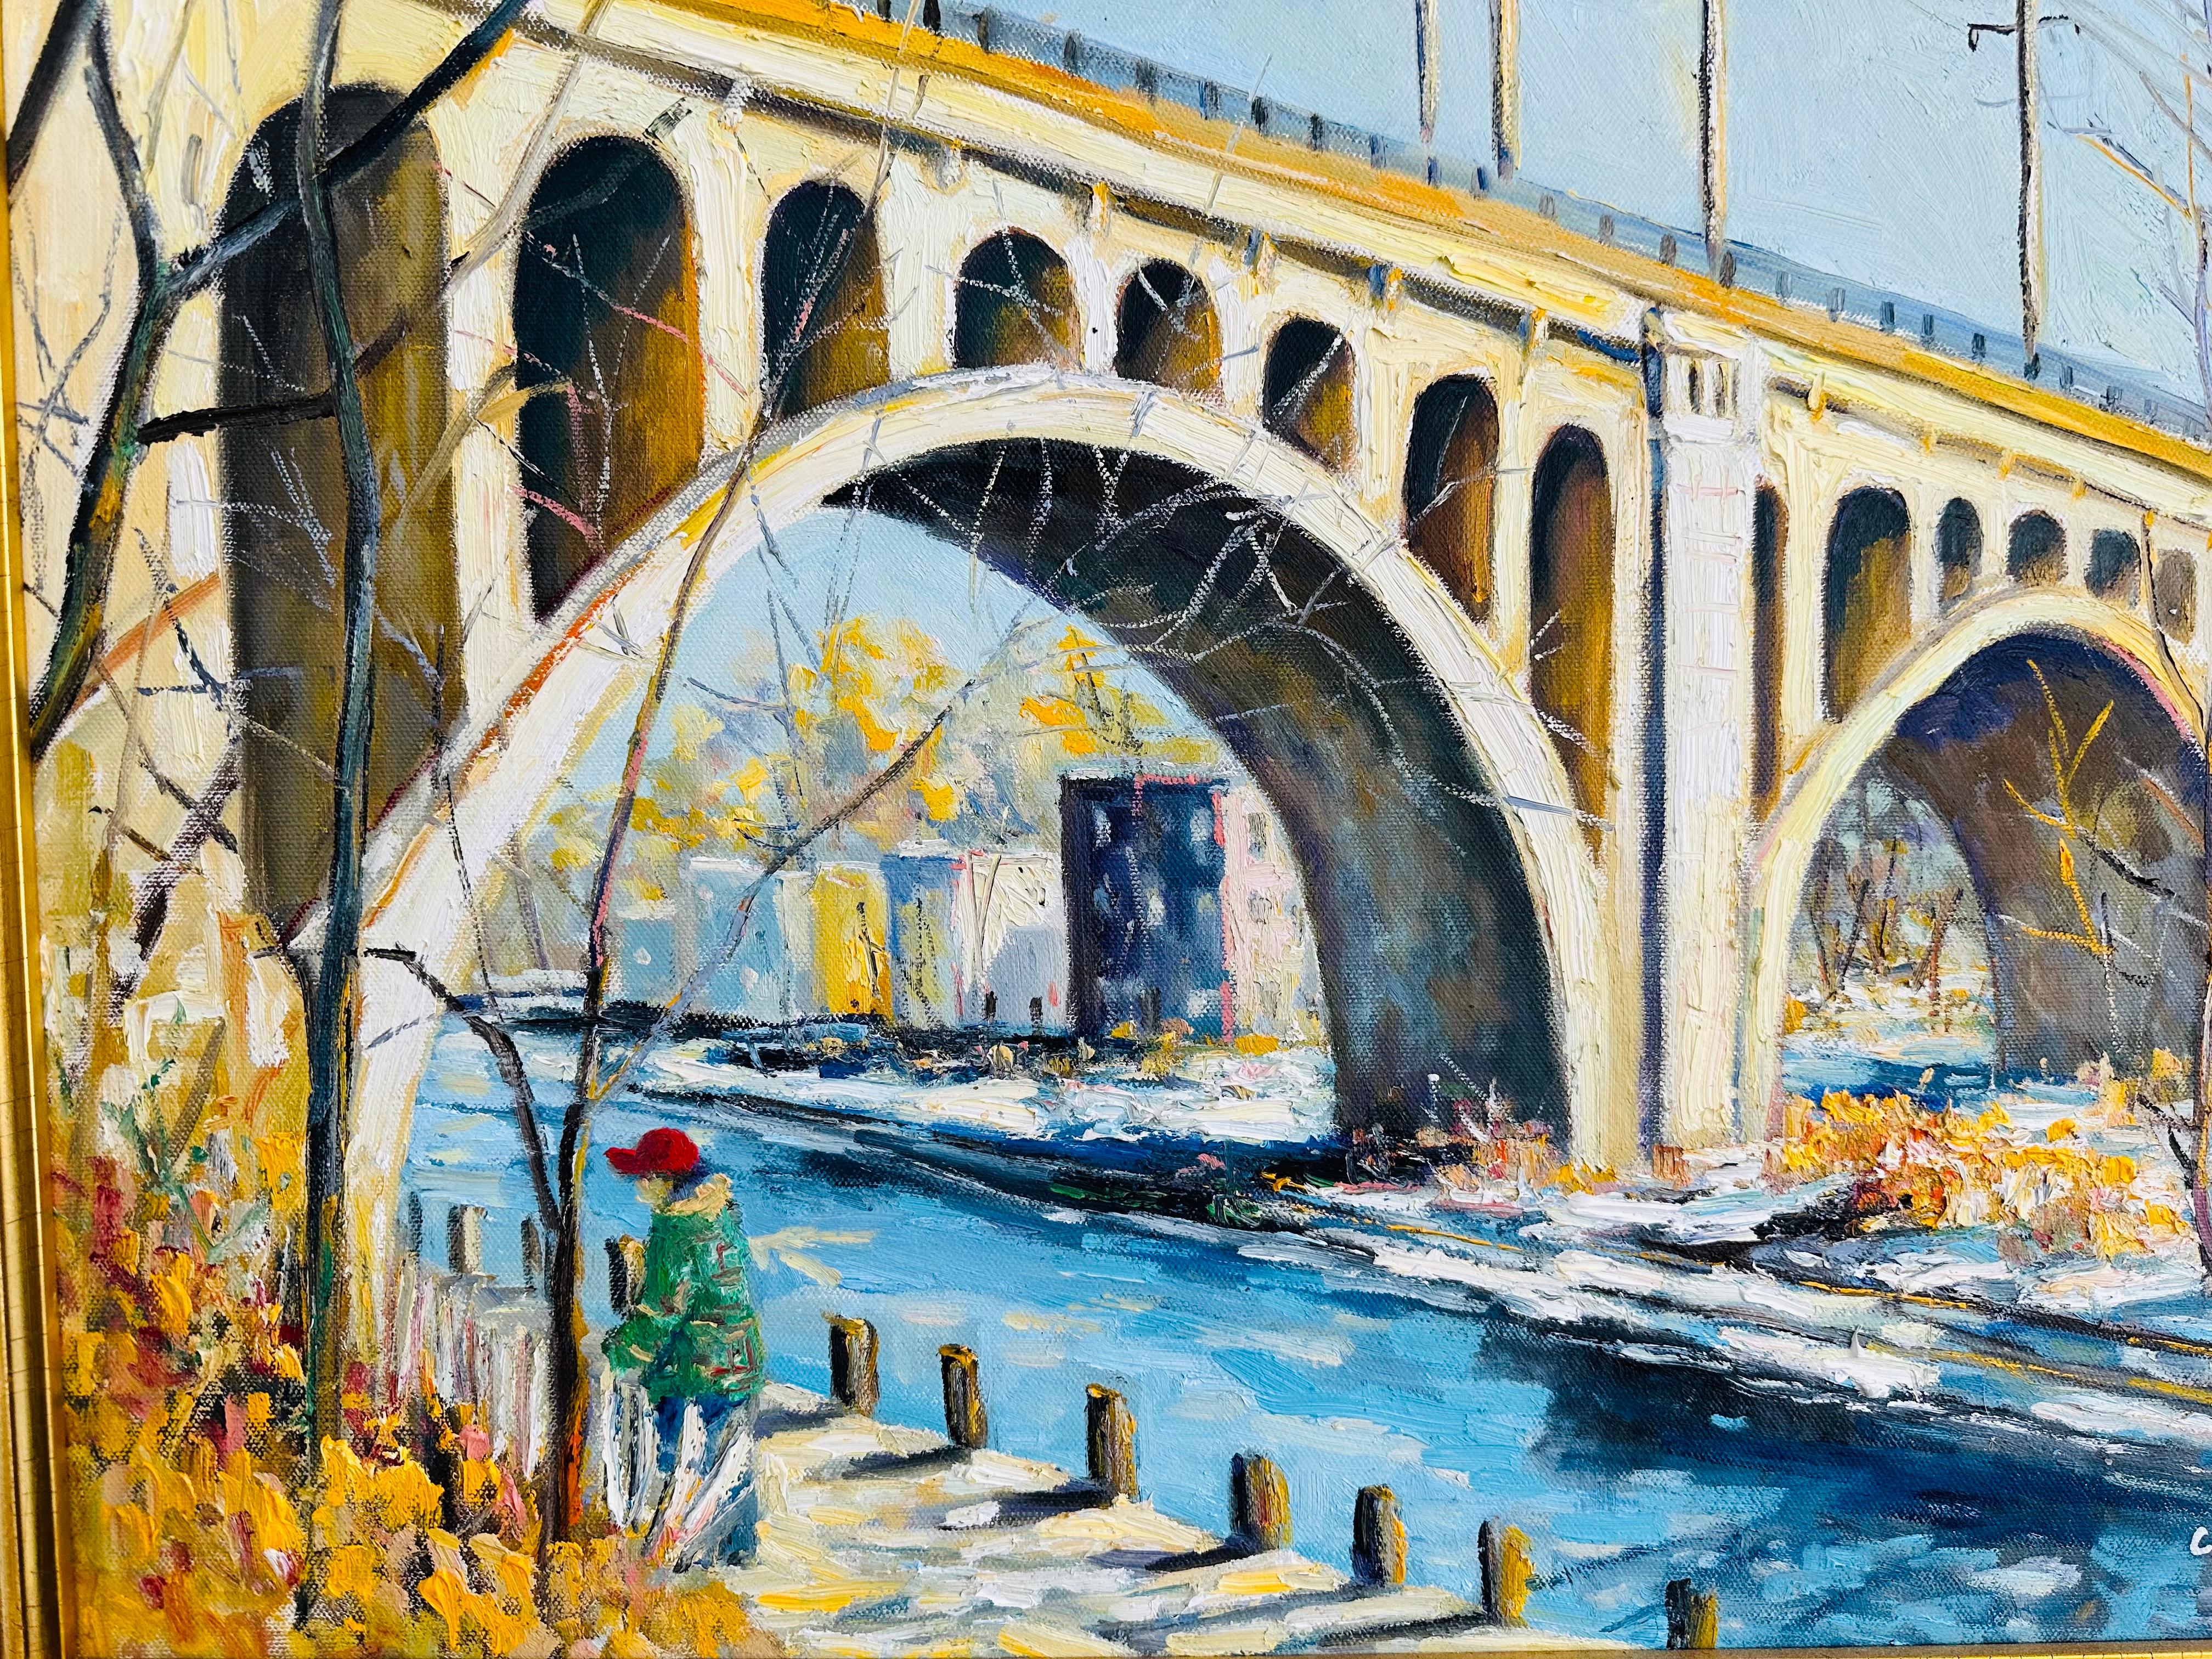 Impressionist large Philadelphia - A brisk morning walk under the Manayunk bridge. A bundled up man takes a stroll along the canal trail. A historic Philadelphia bridge cascades across the backdrop on a chilly winter day. The ground is covered in a